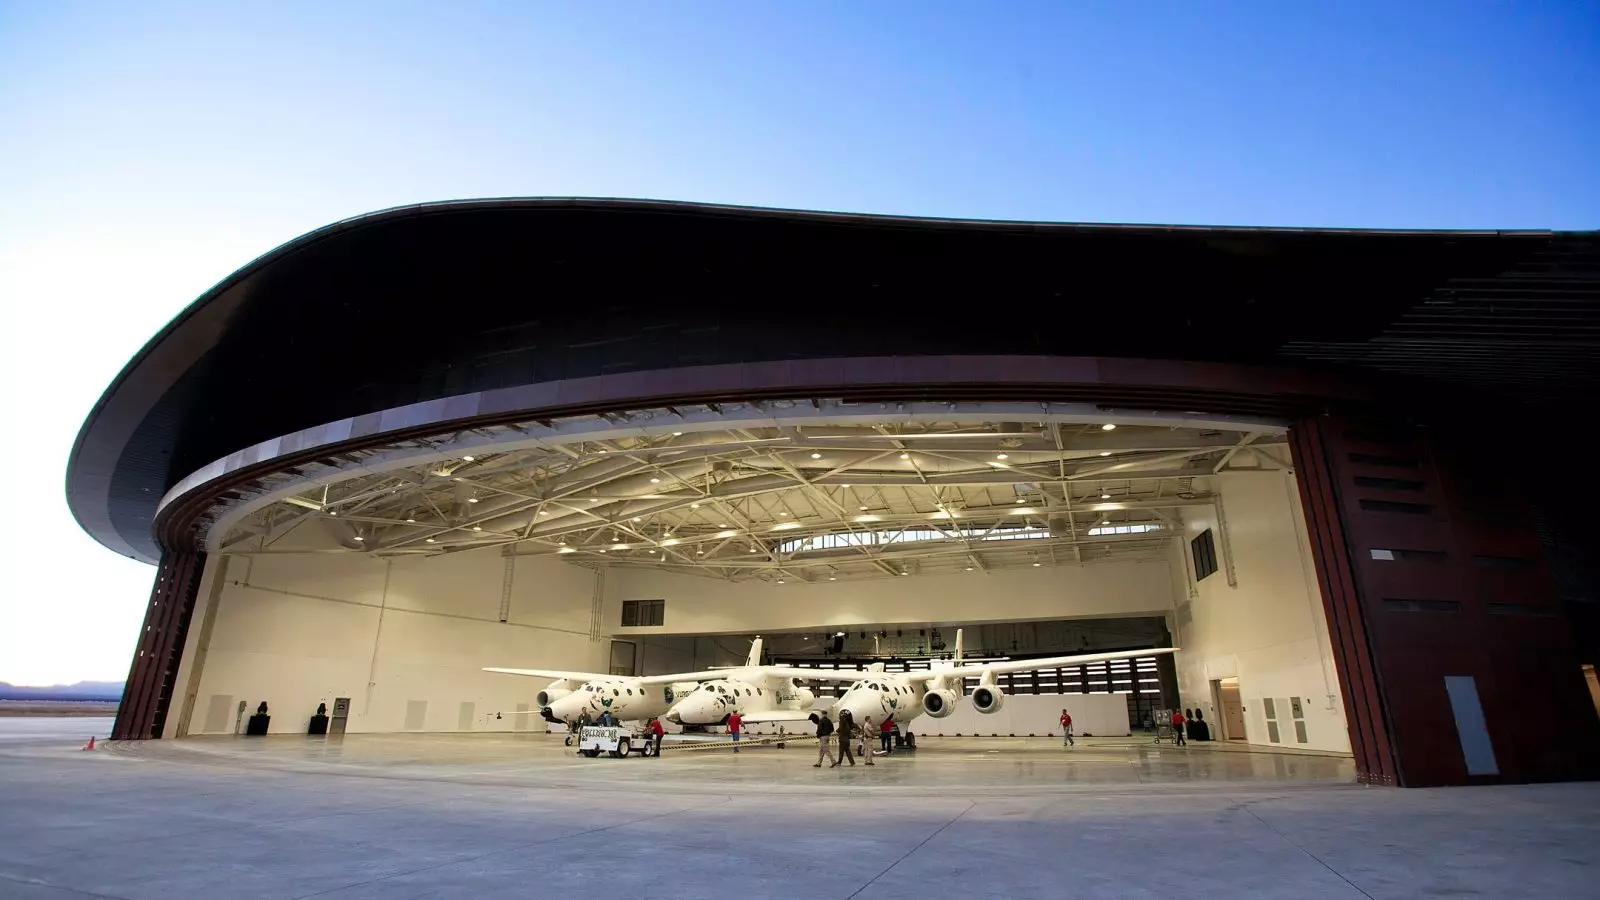 Virgin currently has two reusable vehicles: WhiteKnightTwo and SpaceShipTwo (